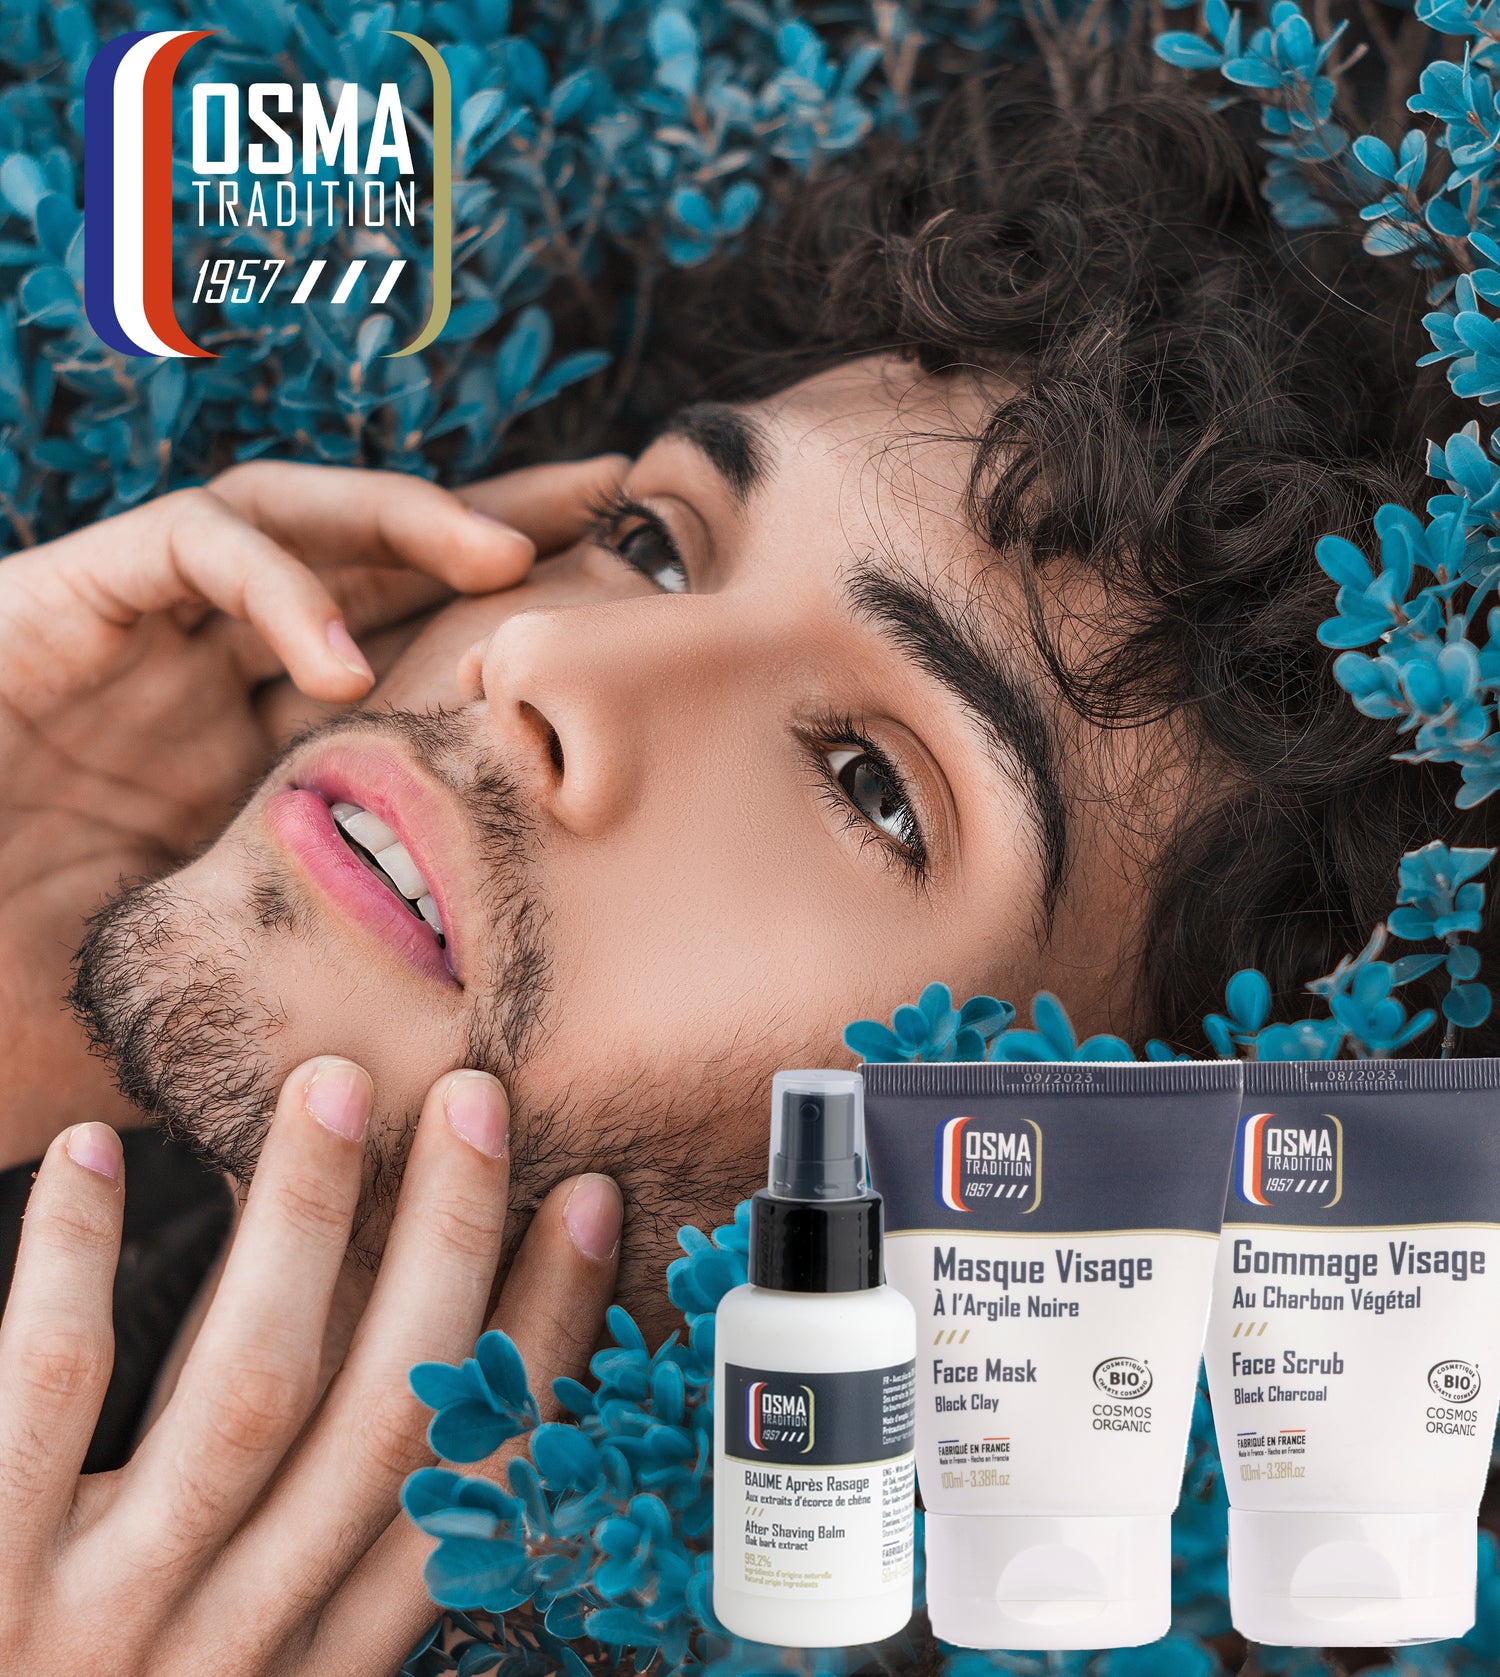 OSMA TRADITION - Soin visage Homme